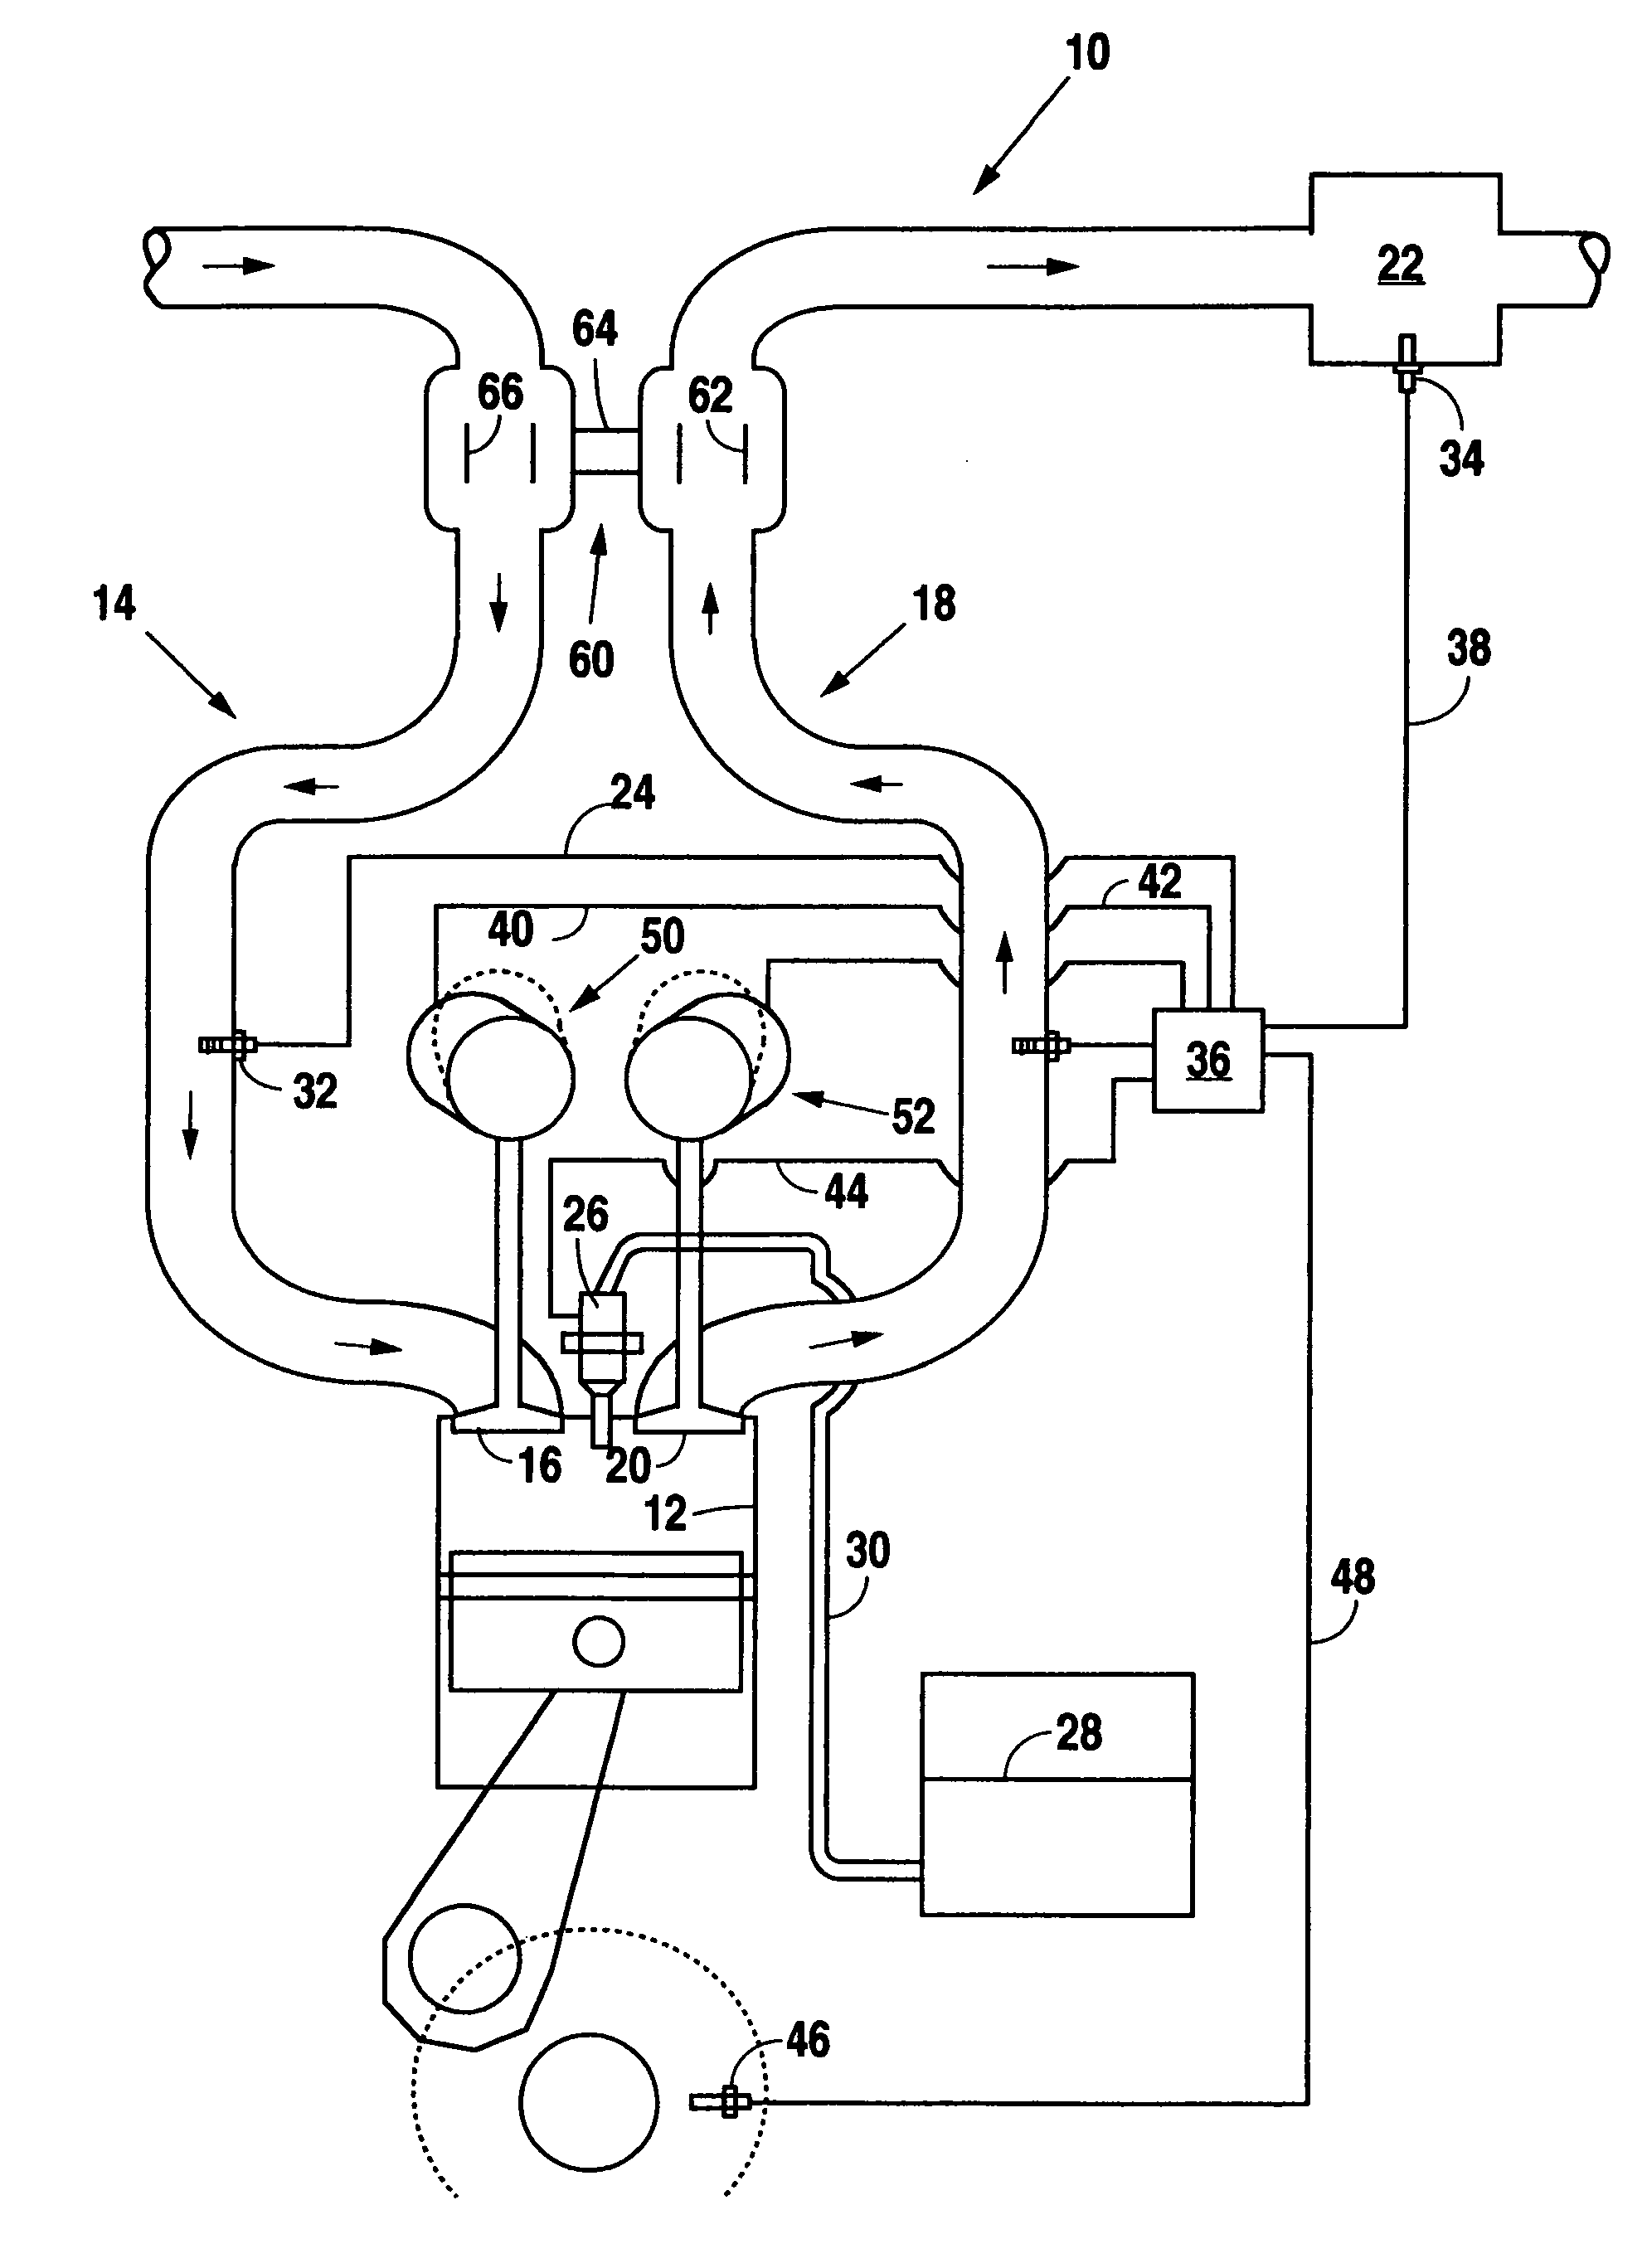 Method for controlling exhaust gas temperature and space velocity during regeneration to protect temperature sensitive diesel engine components and aftertreatment devices